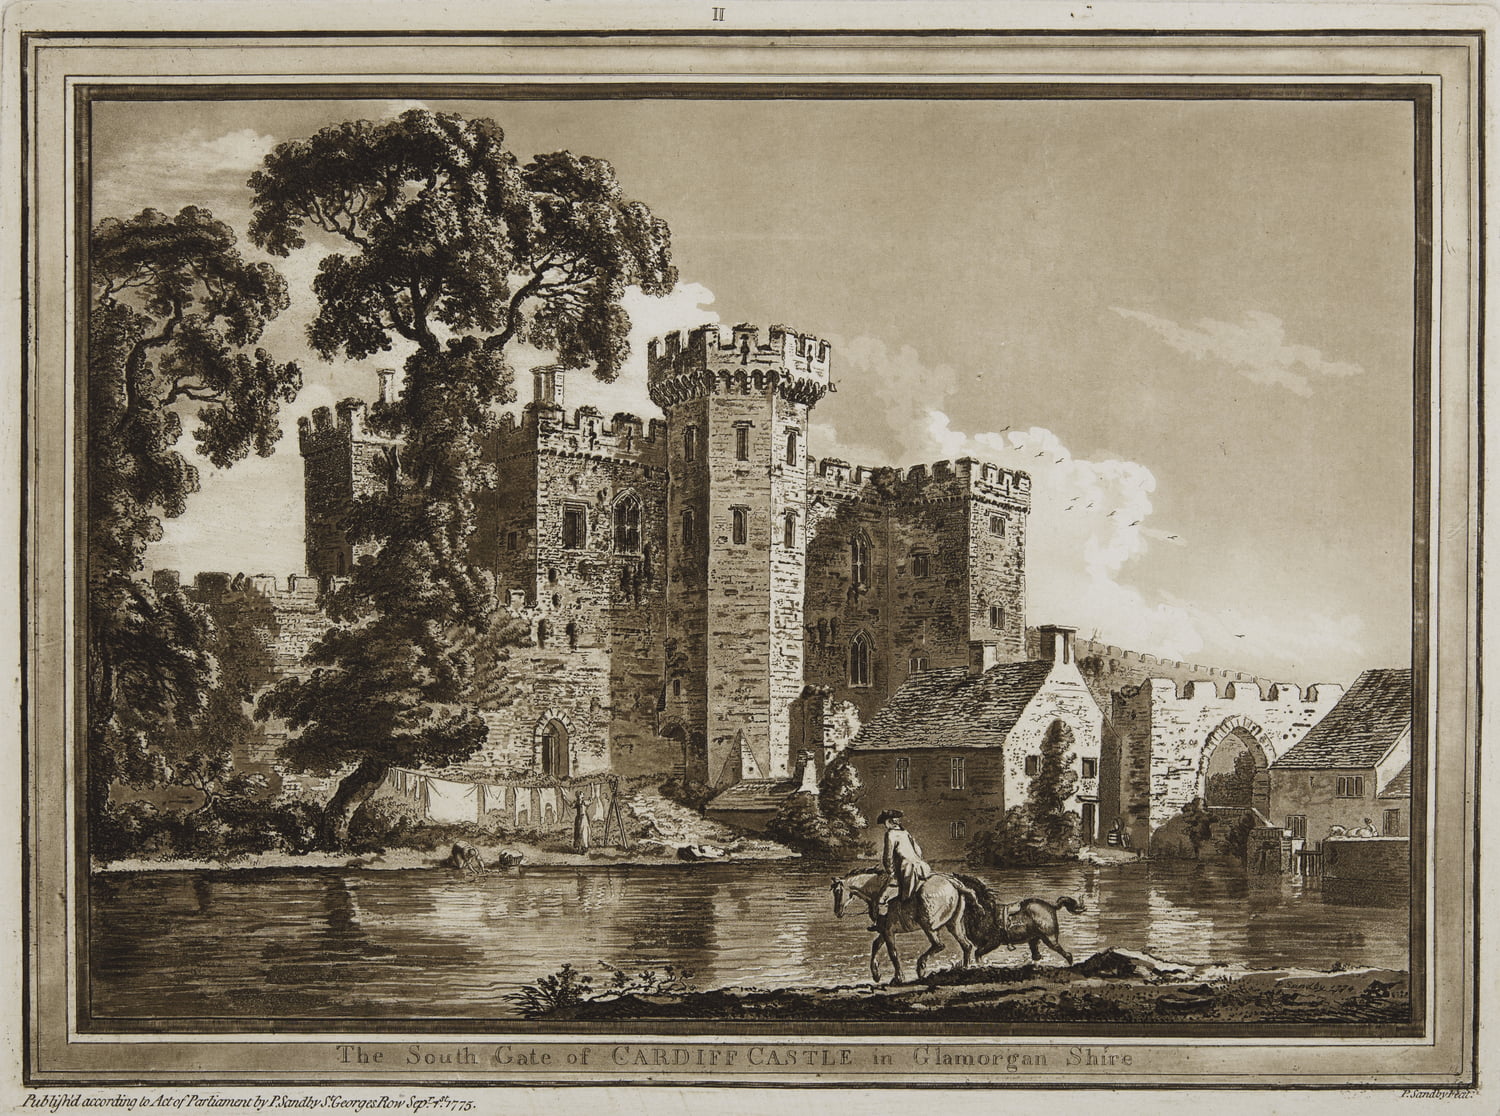 The South Gate Of Cardiff Castle, Glamor